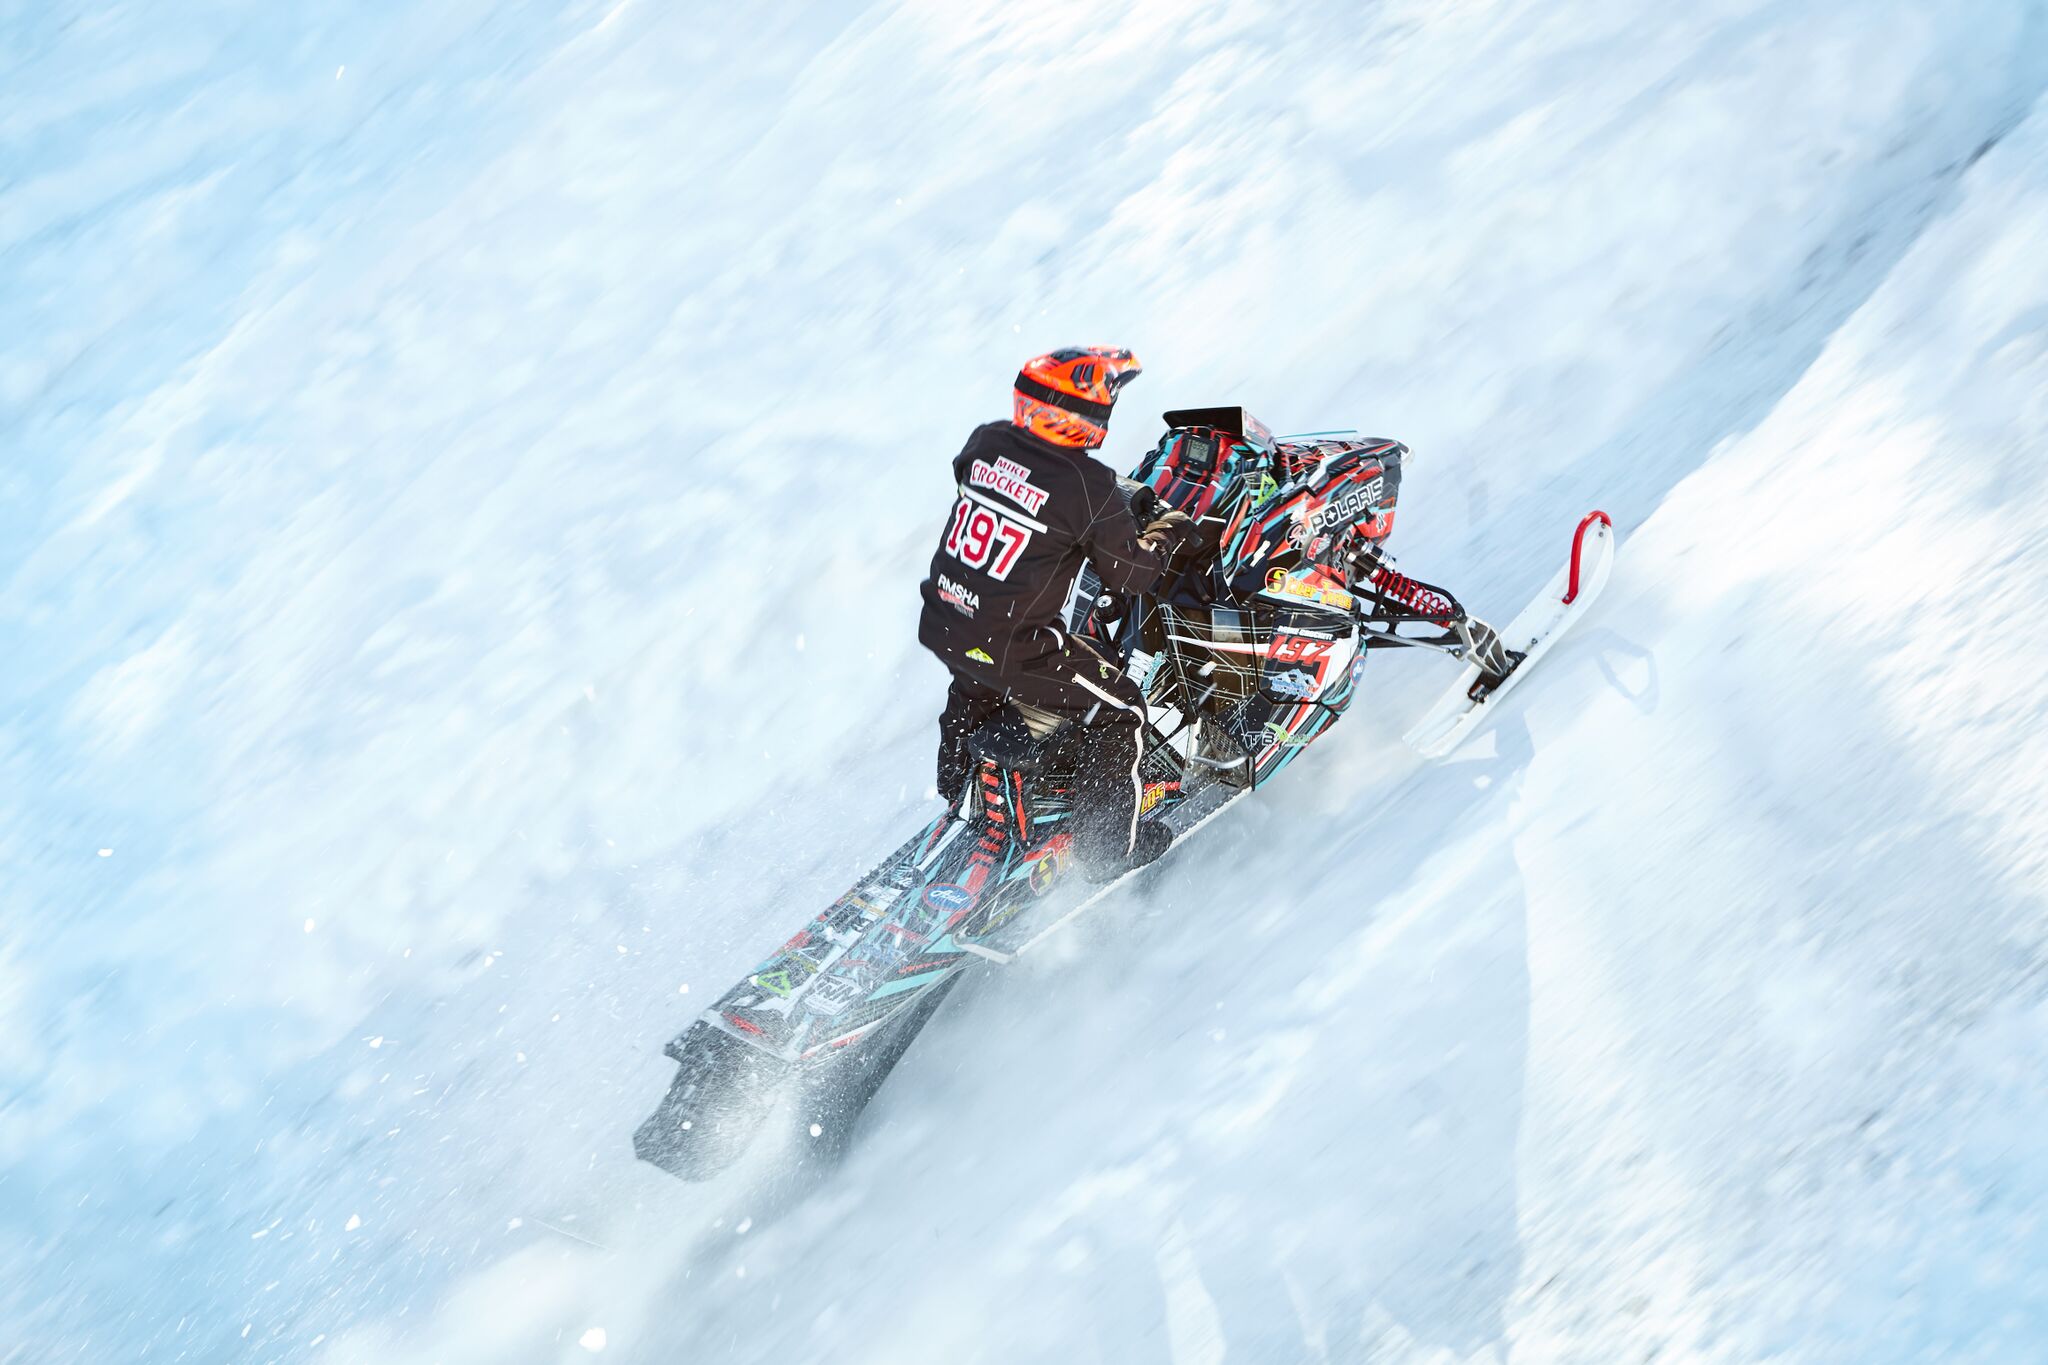 42nd Annual World Championship Snowmobile Hill Climb 2018 rider on snowmobile going uphill